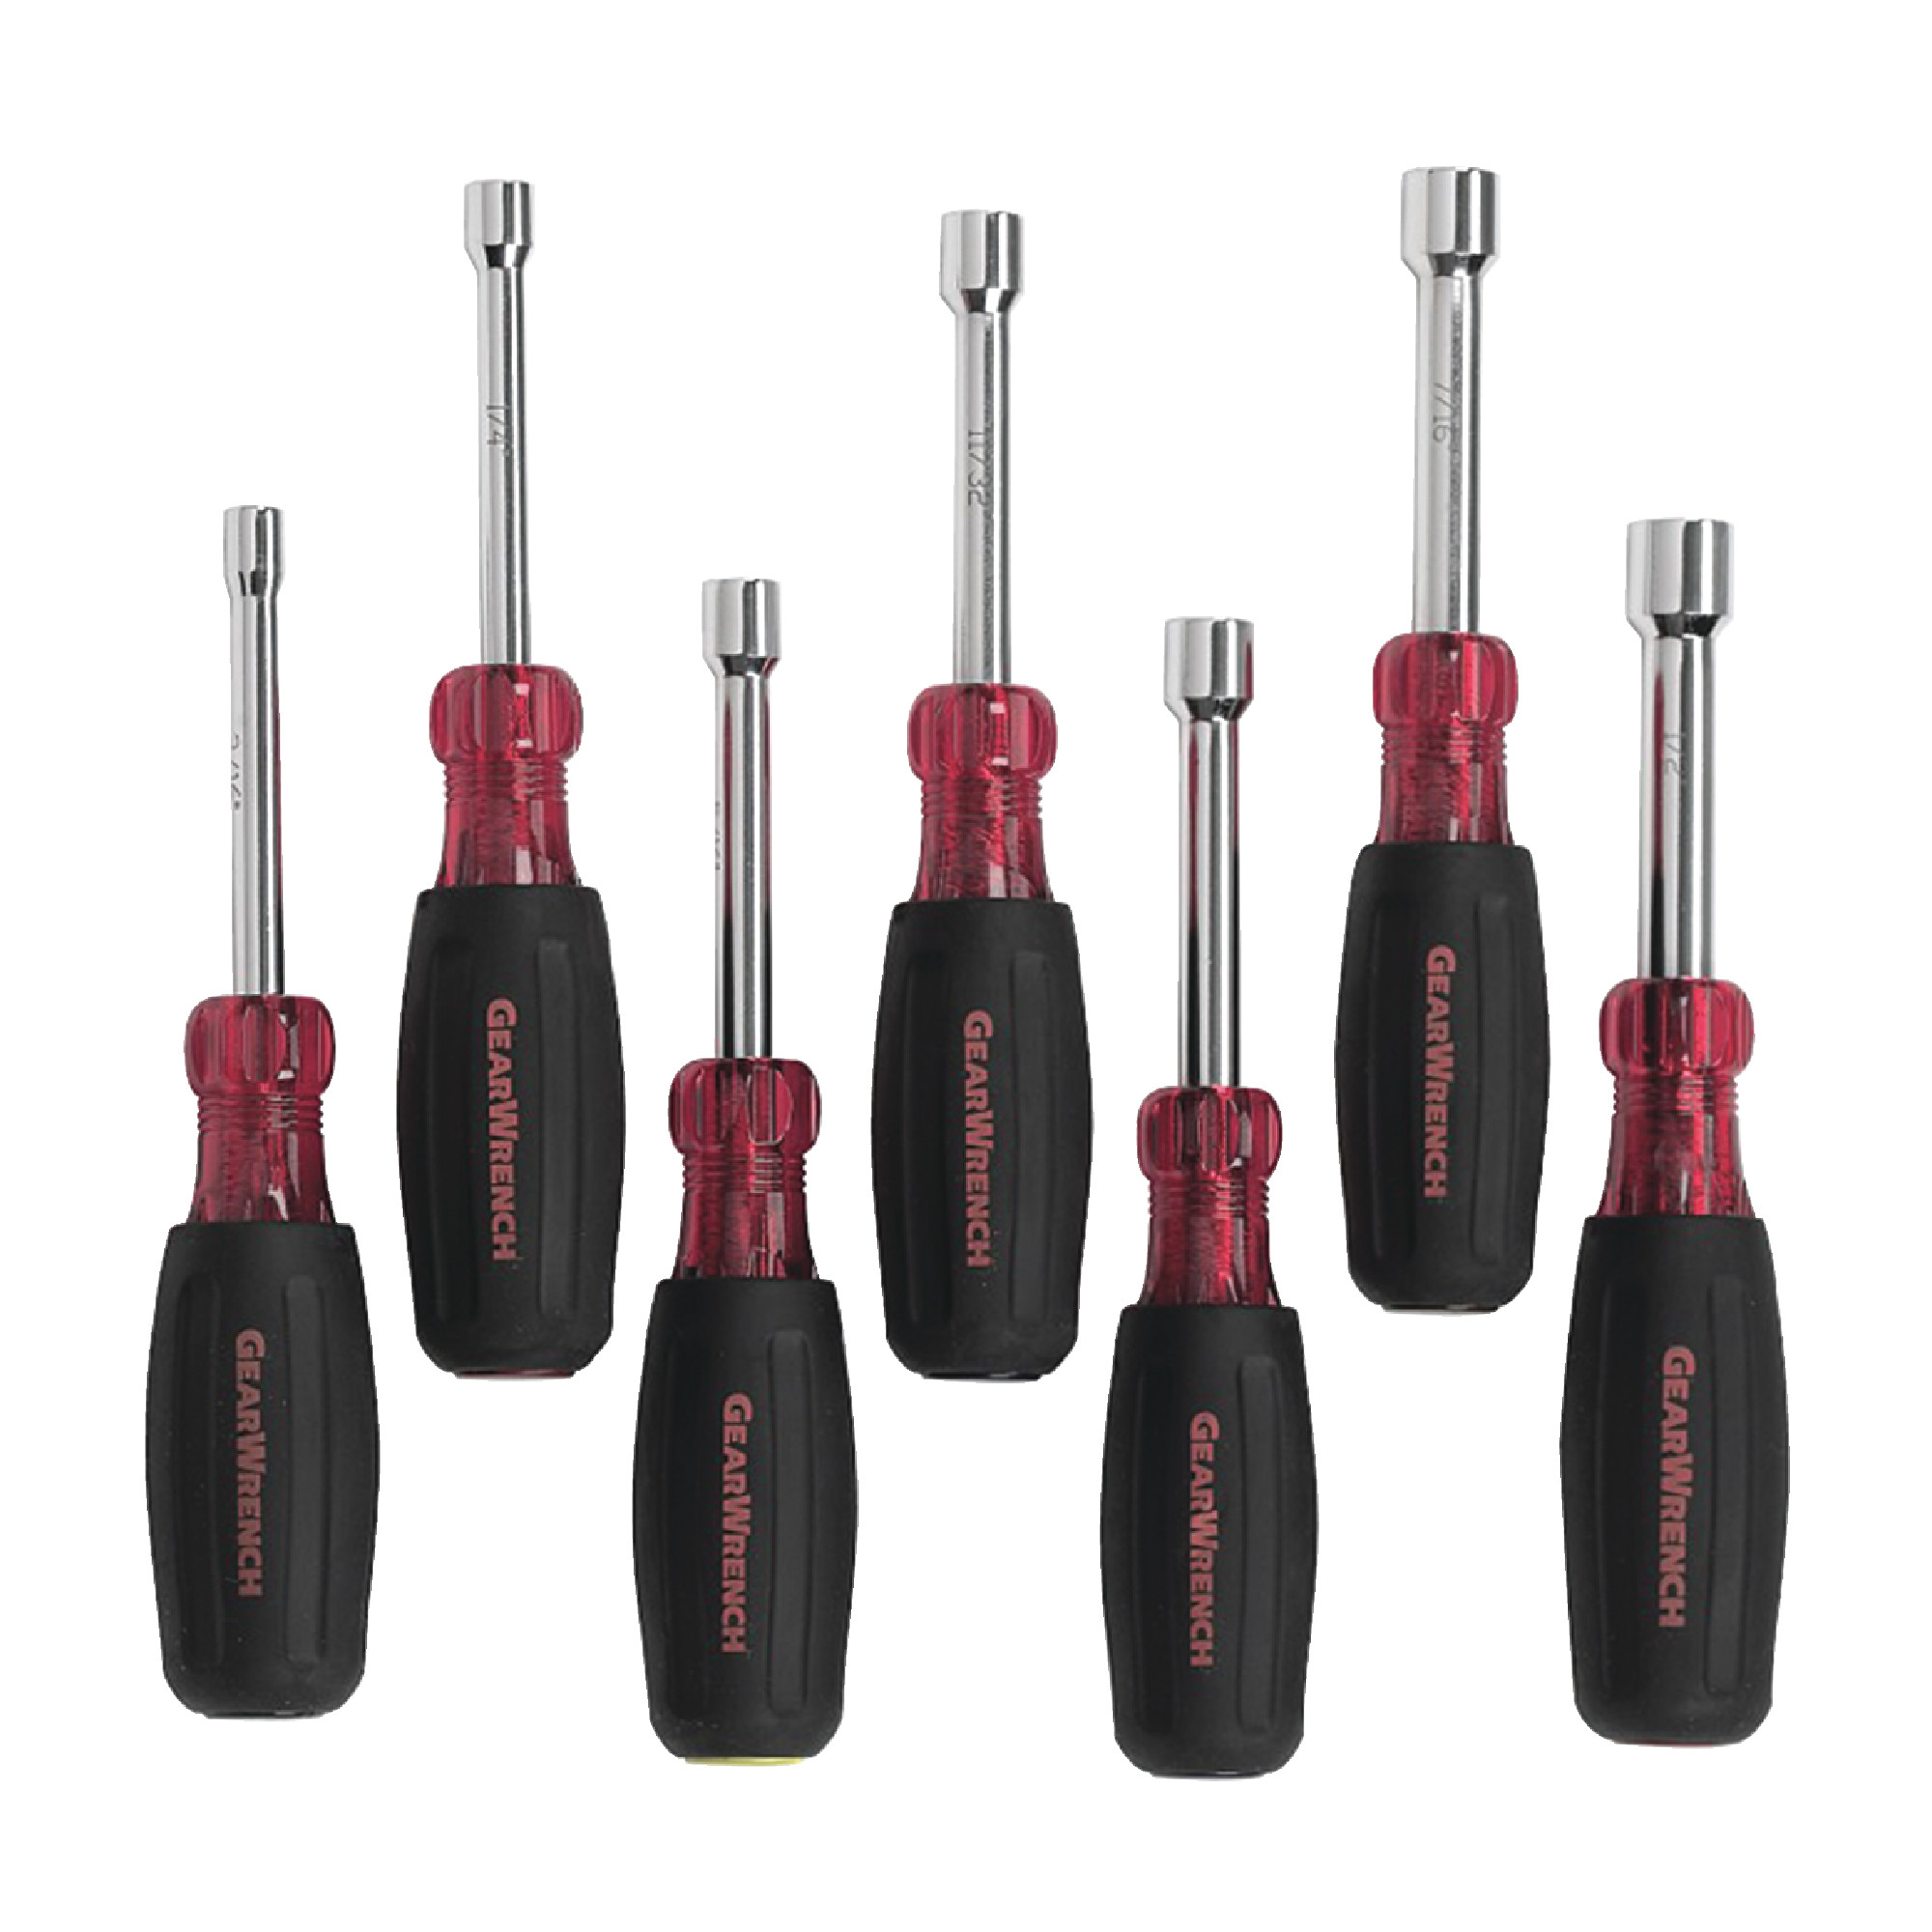 7 Piece 3/16" to 1/2" Hollow Shaft Nut Driver Set - Model: 82765